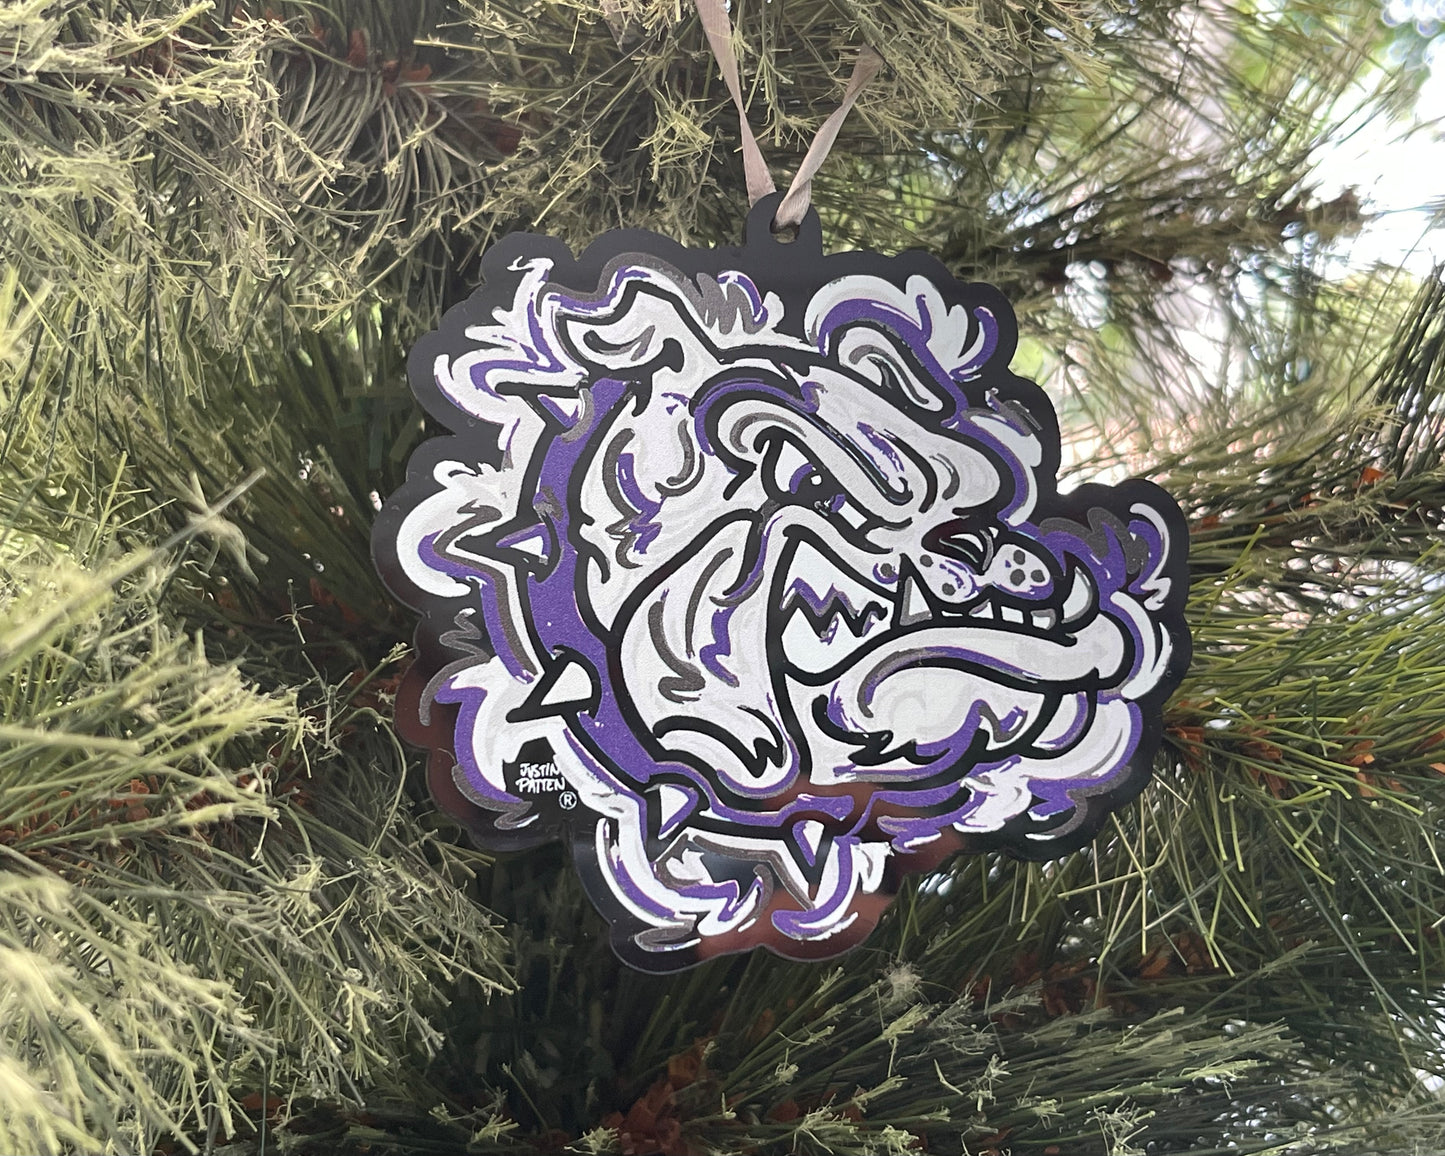 Brownsburg Ornament by Justin Patten